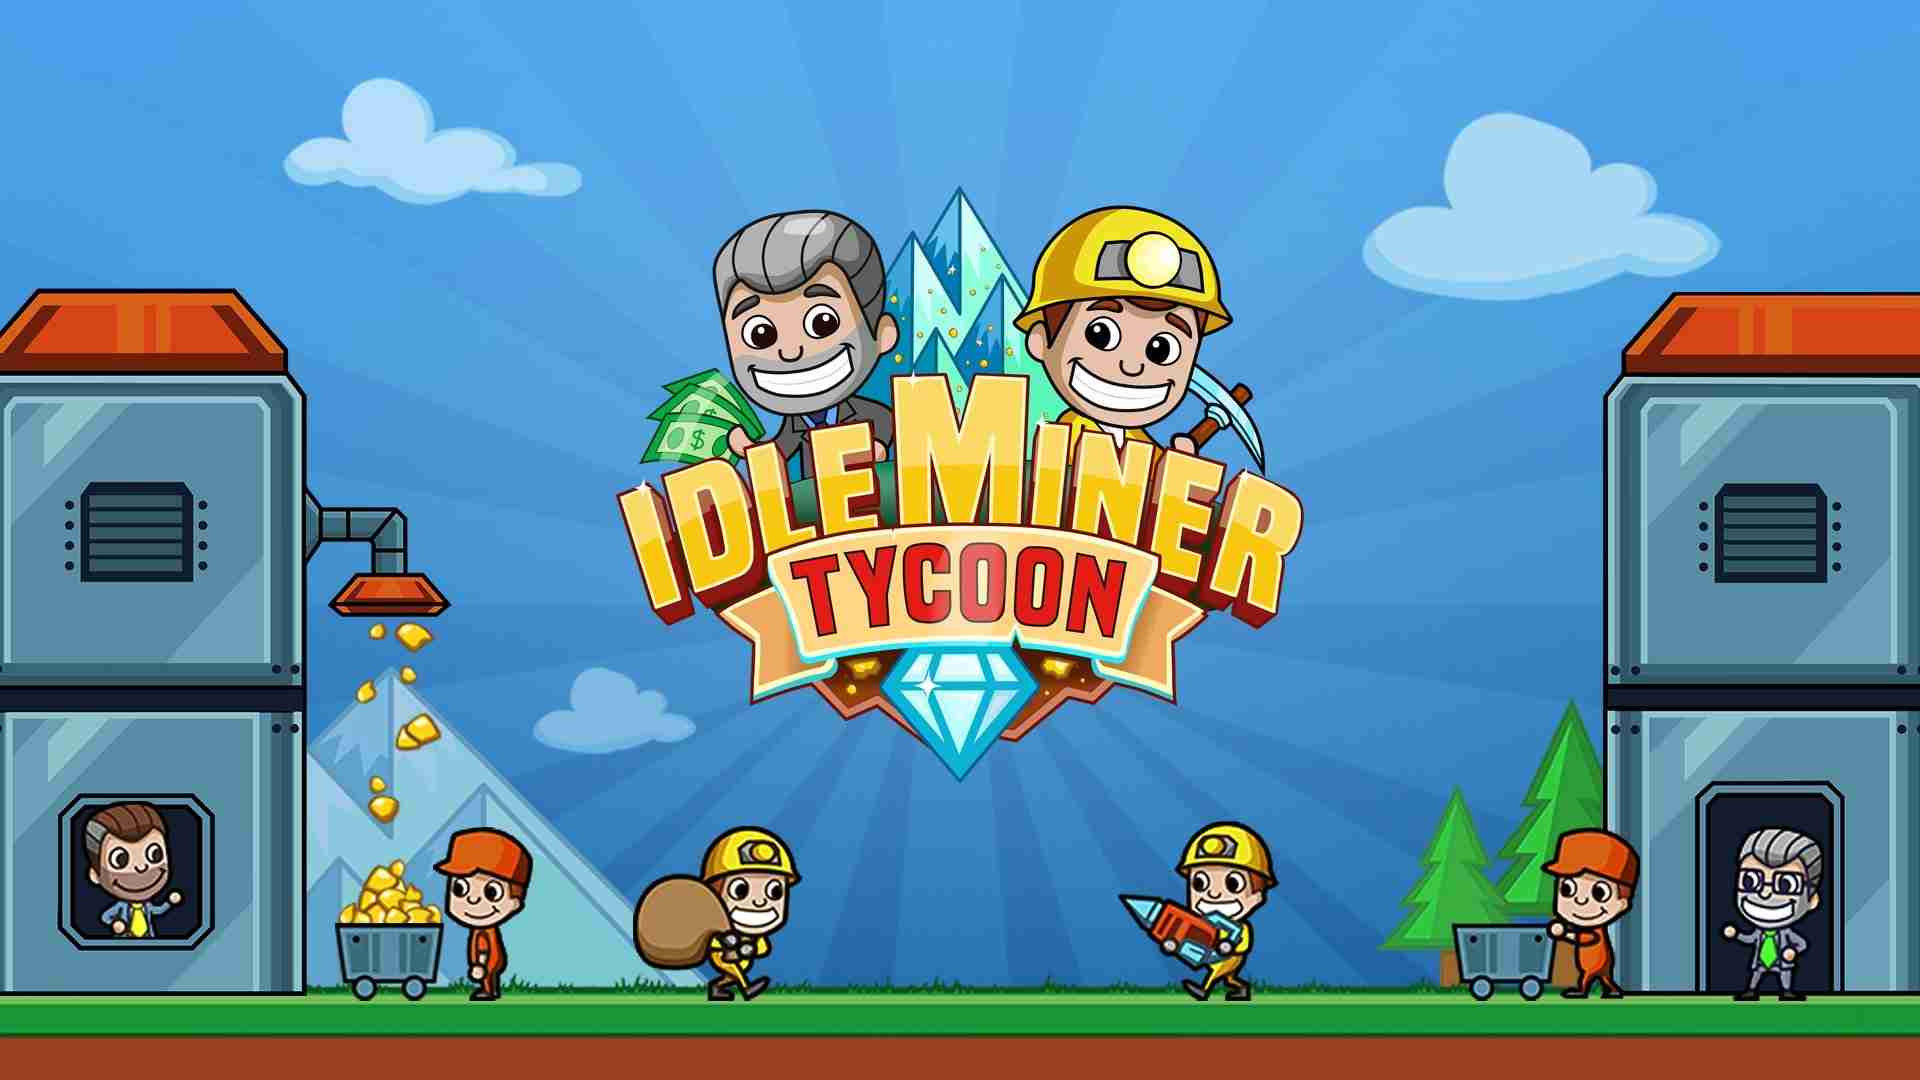 Idle-Miner-Tycoon-cover-min.jpg